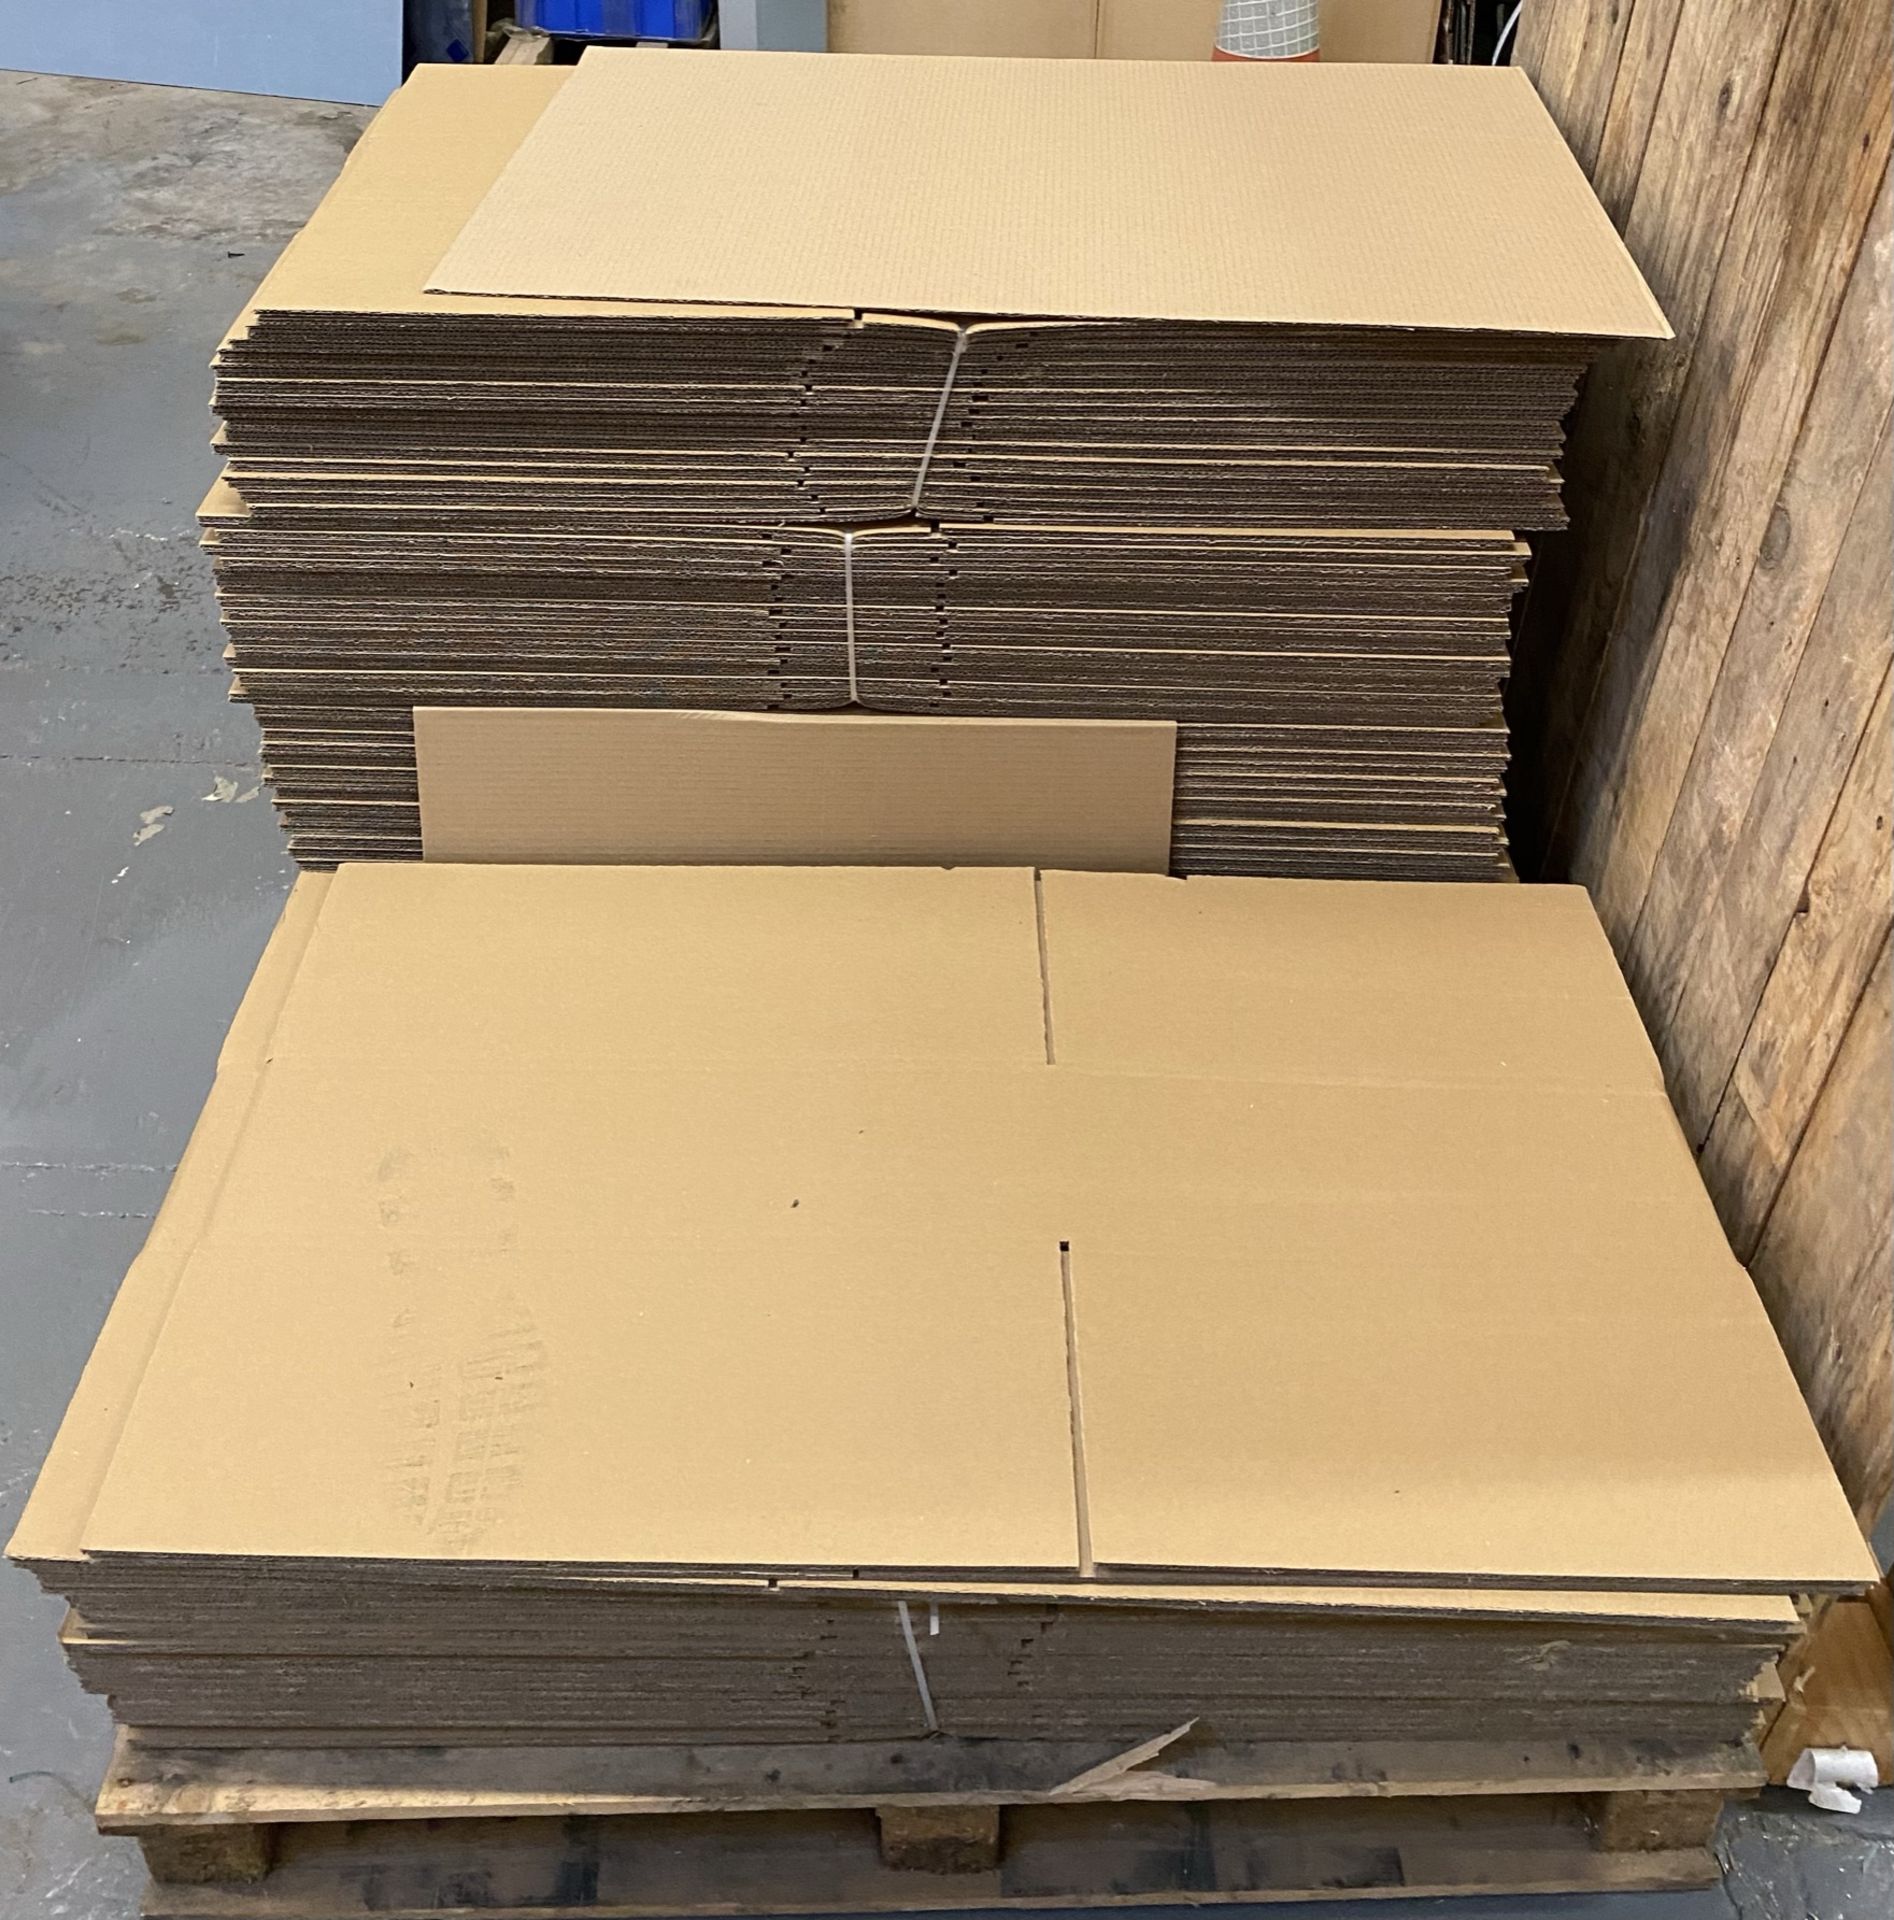 Contents to pallet - flat pack cardboard